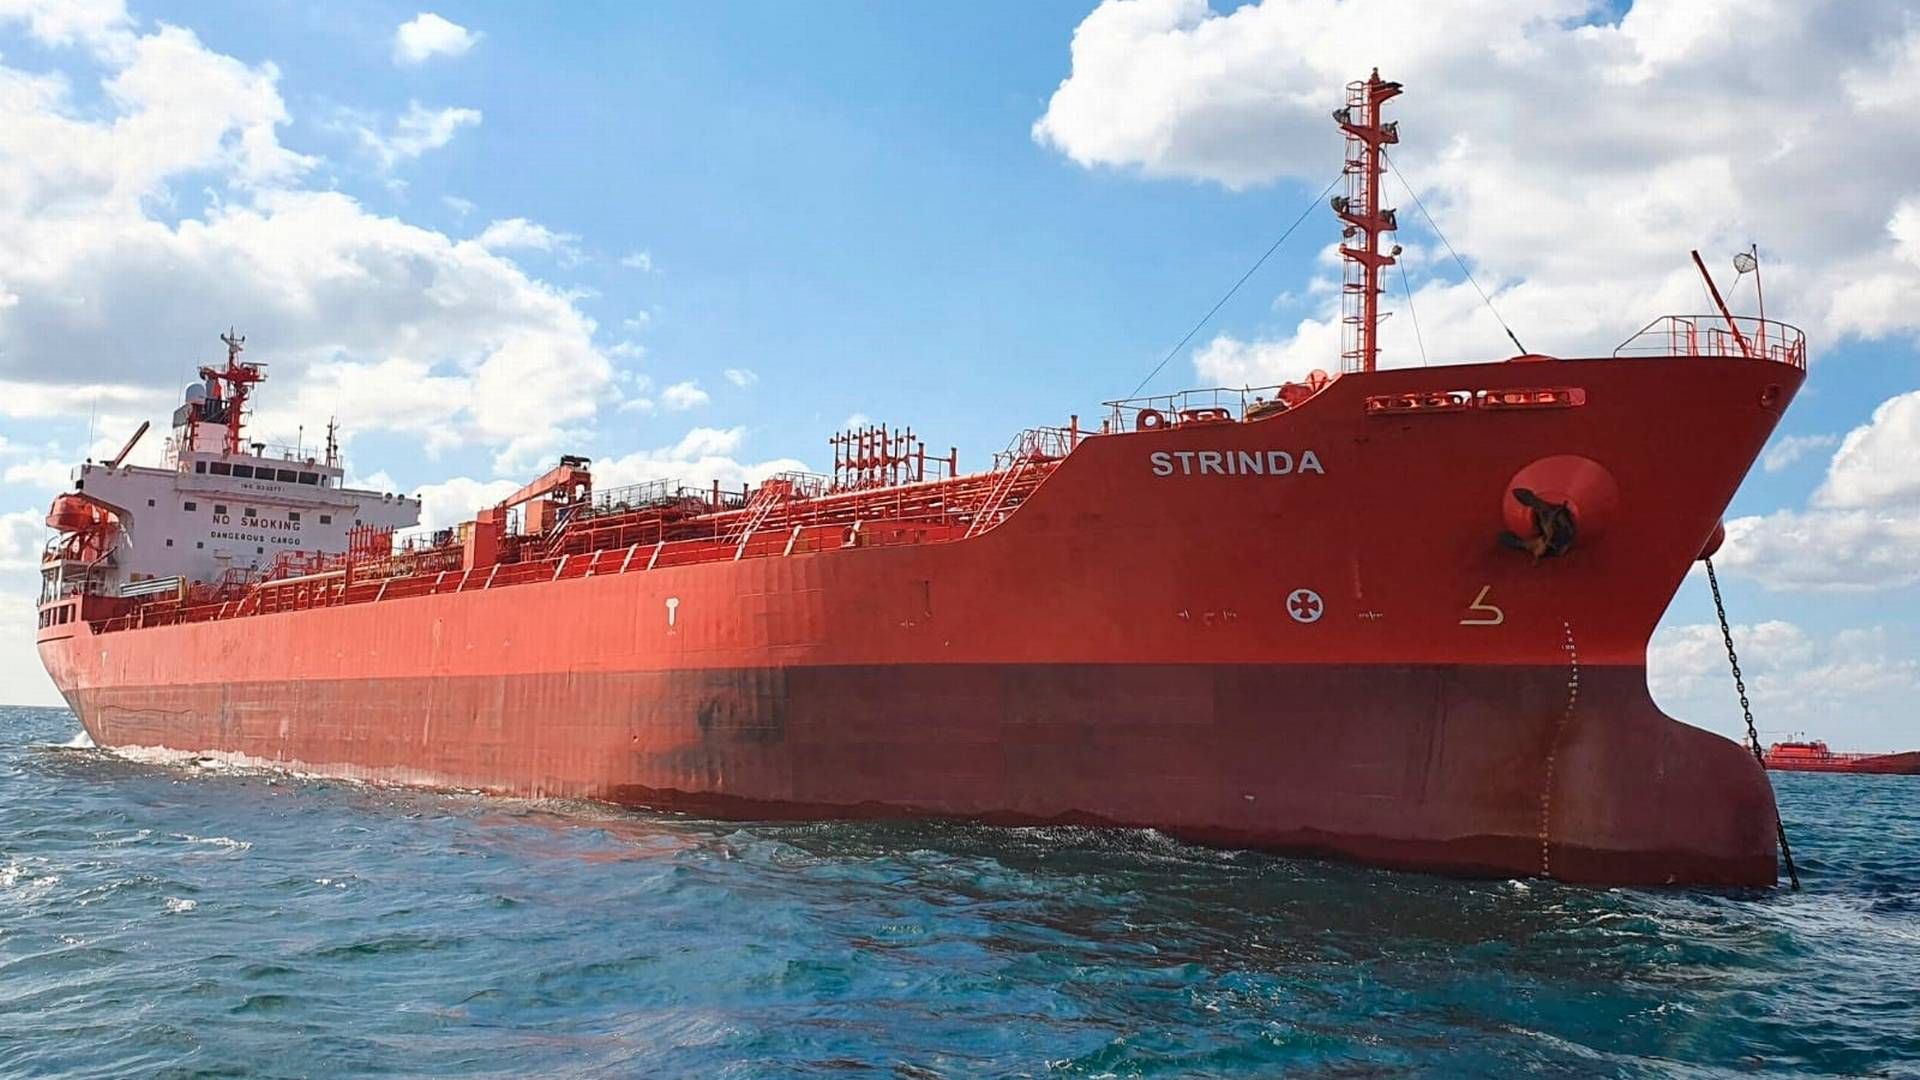 On Dec. 12, the Norwegian-flagged chemical tanker MT Strinda was subjected to a missile attack claimed by the Houthi rebel movement from Yemen. The ship was damaged, but the crew escaped unharmed. | Photo: Handout